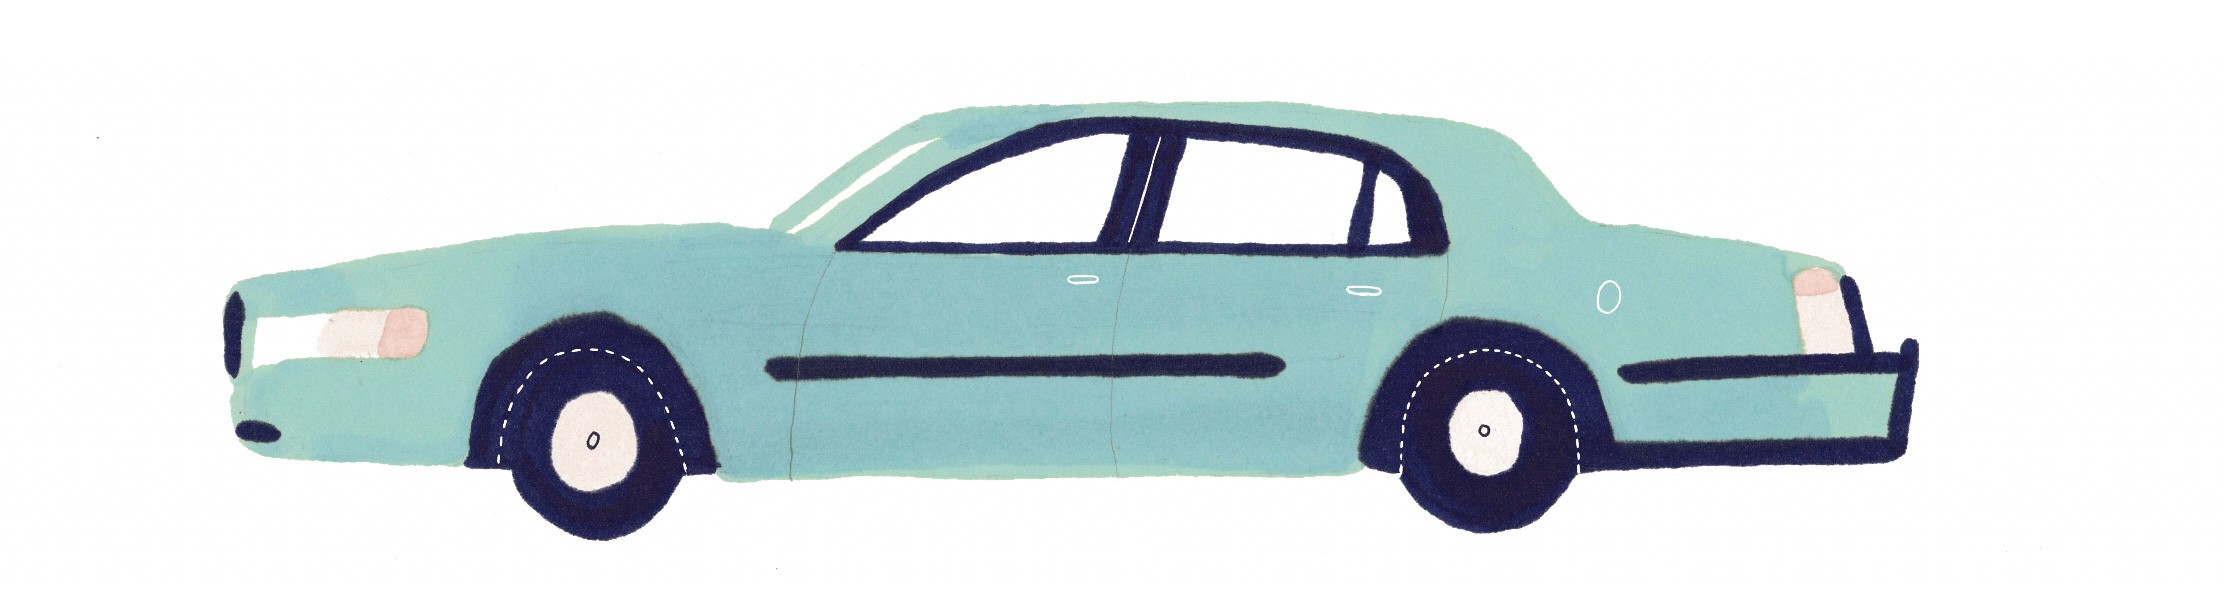 Illustration of Lincoln Town Car